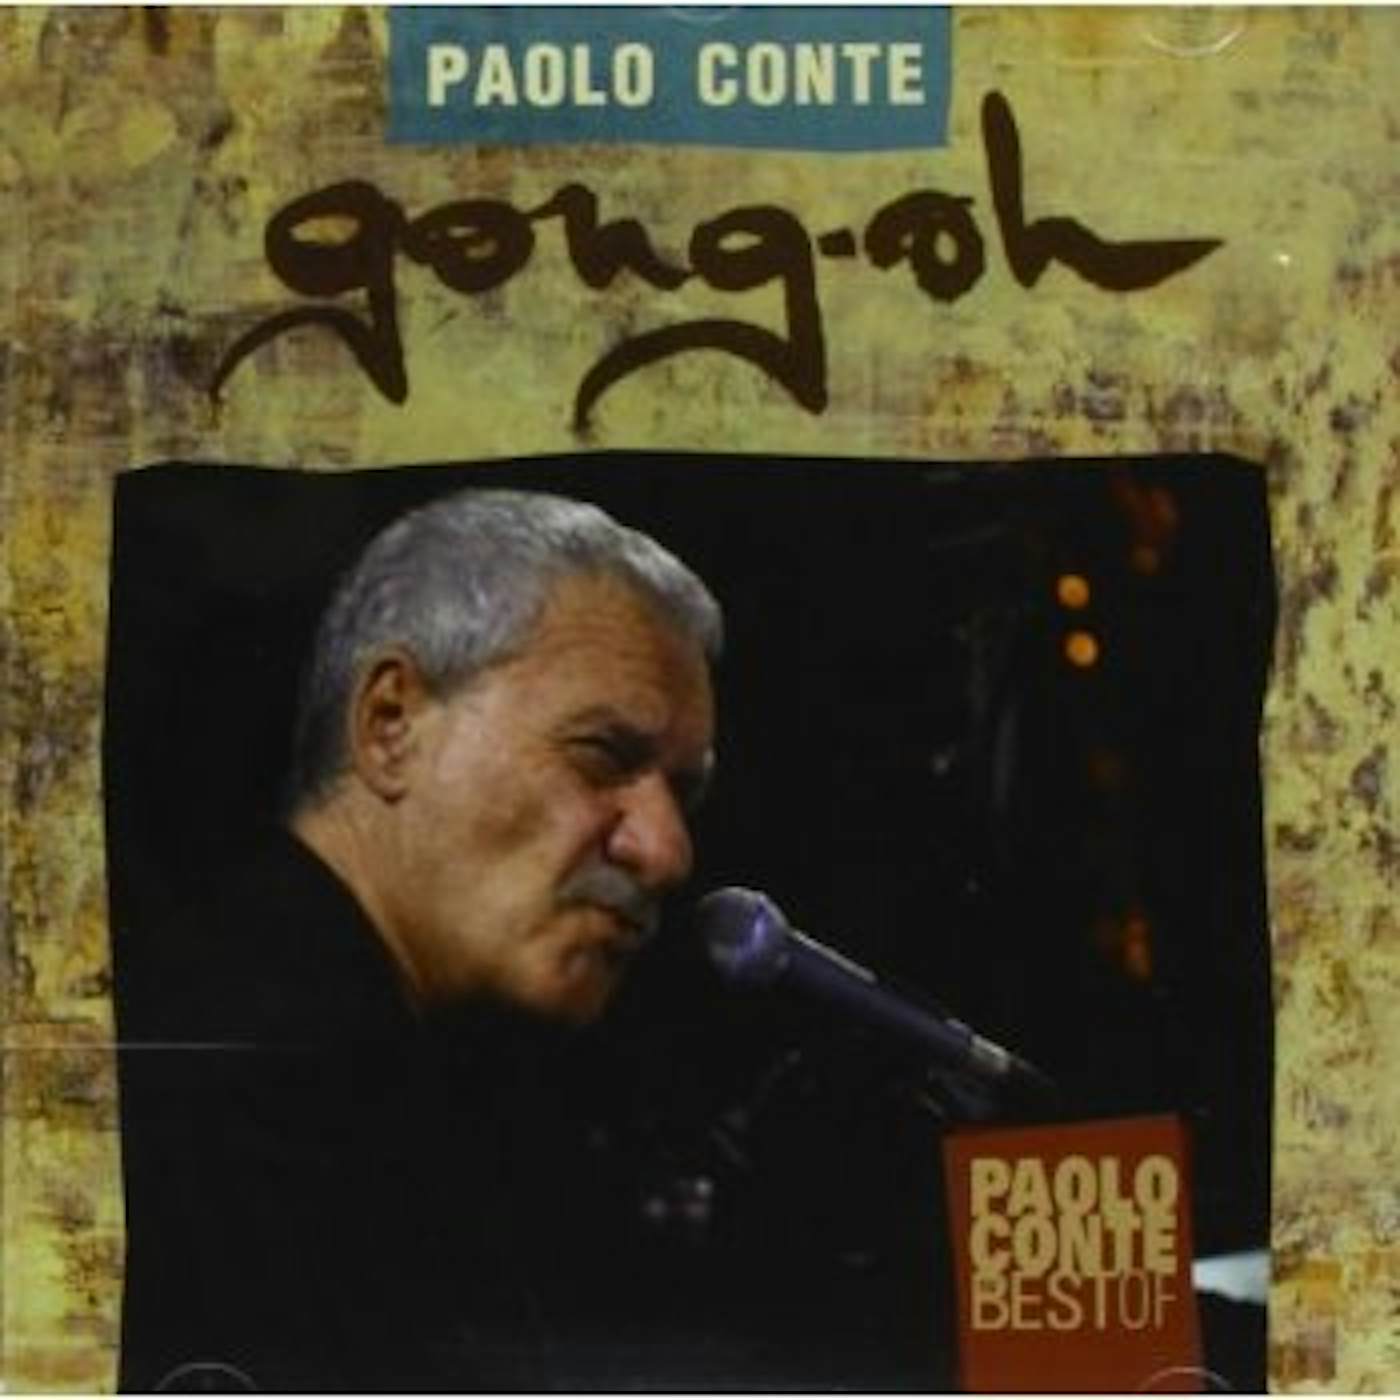 Paolo Conte GONG-OH CD